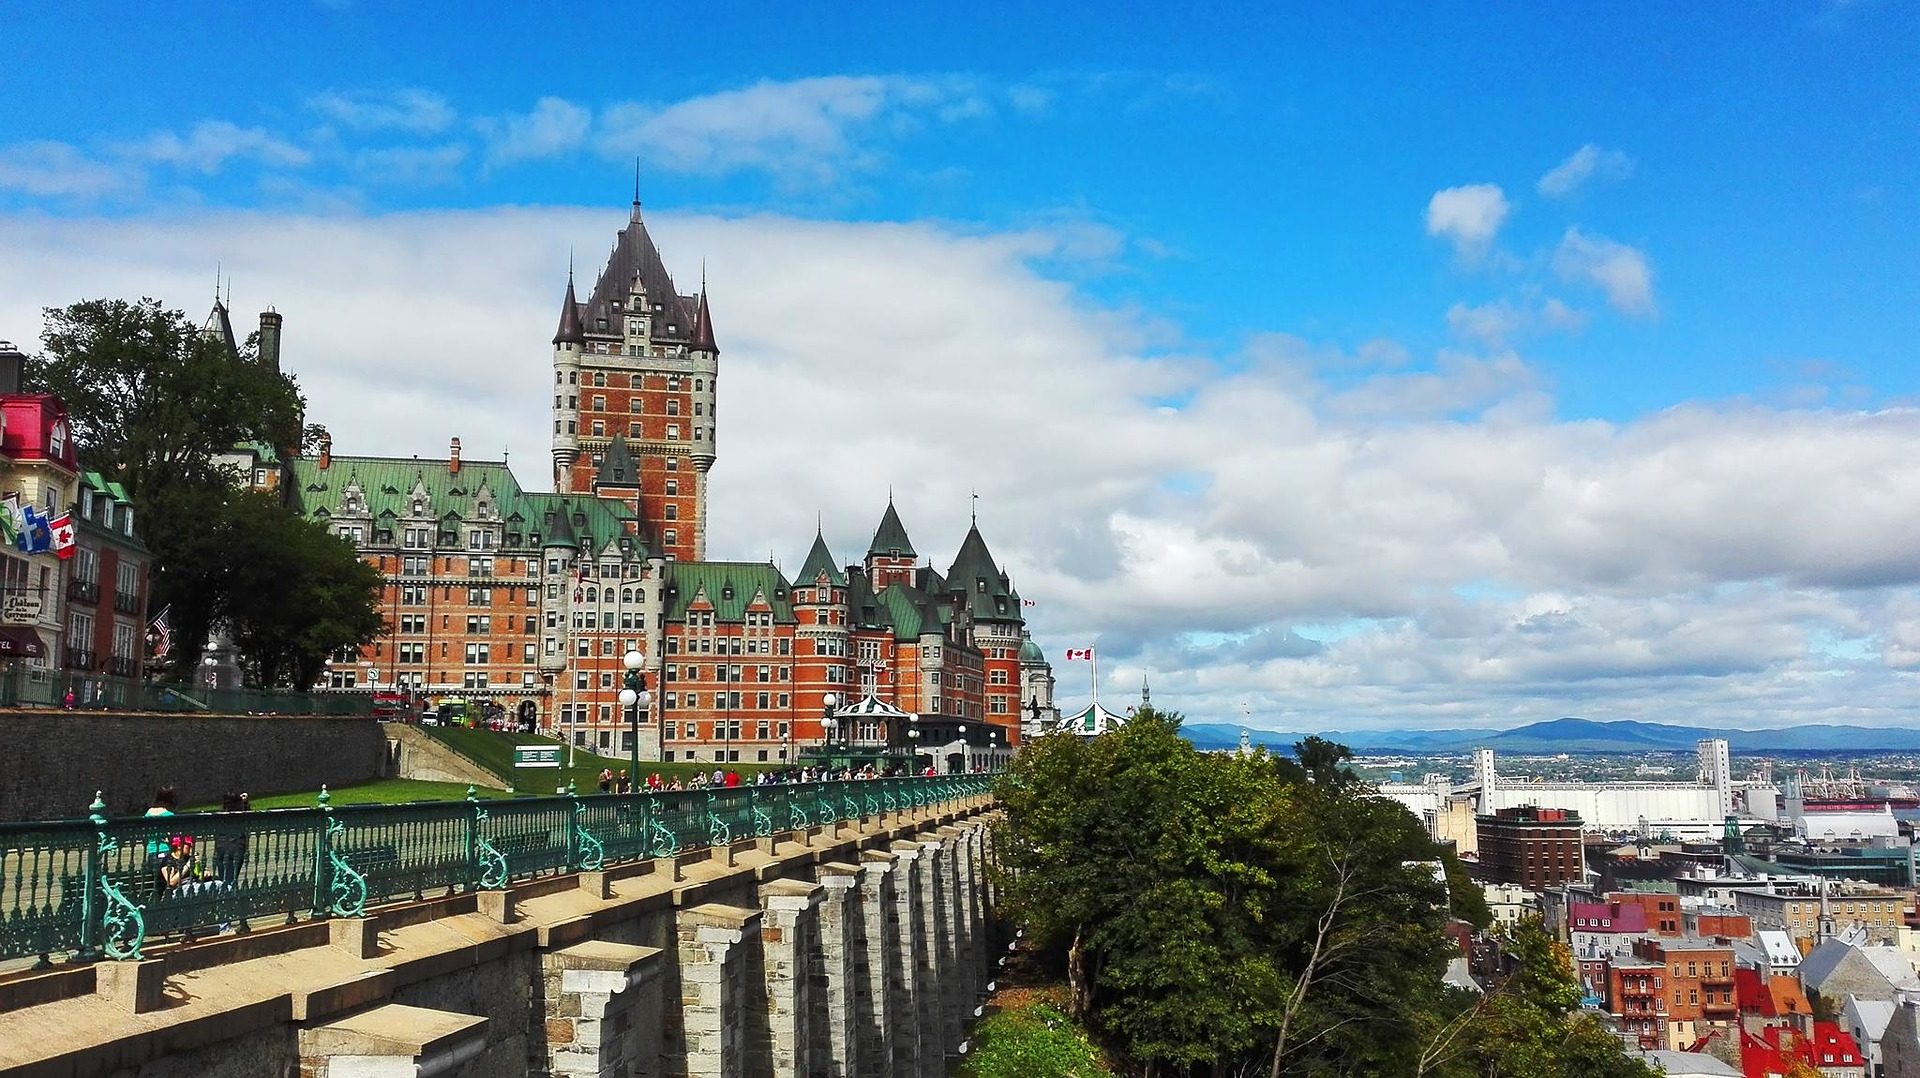 frontenac 2257154 1920 Fun Things To Do In Quebec City